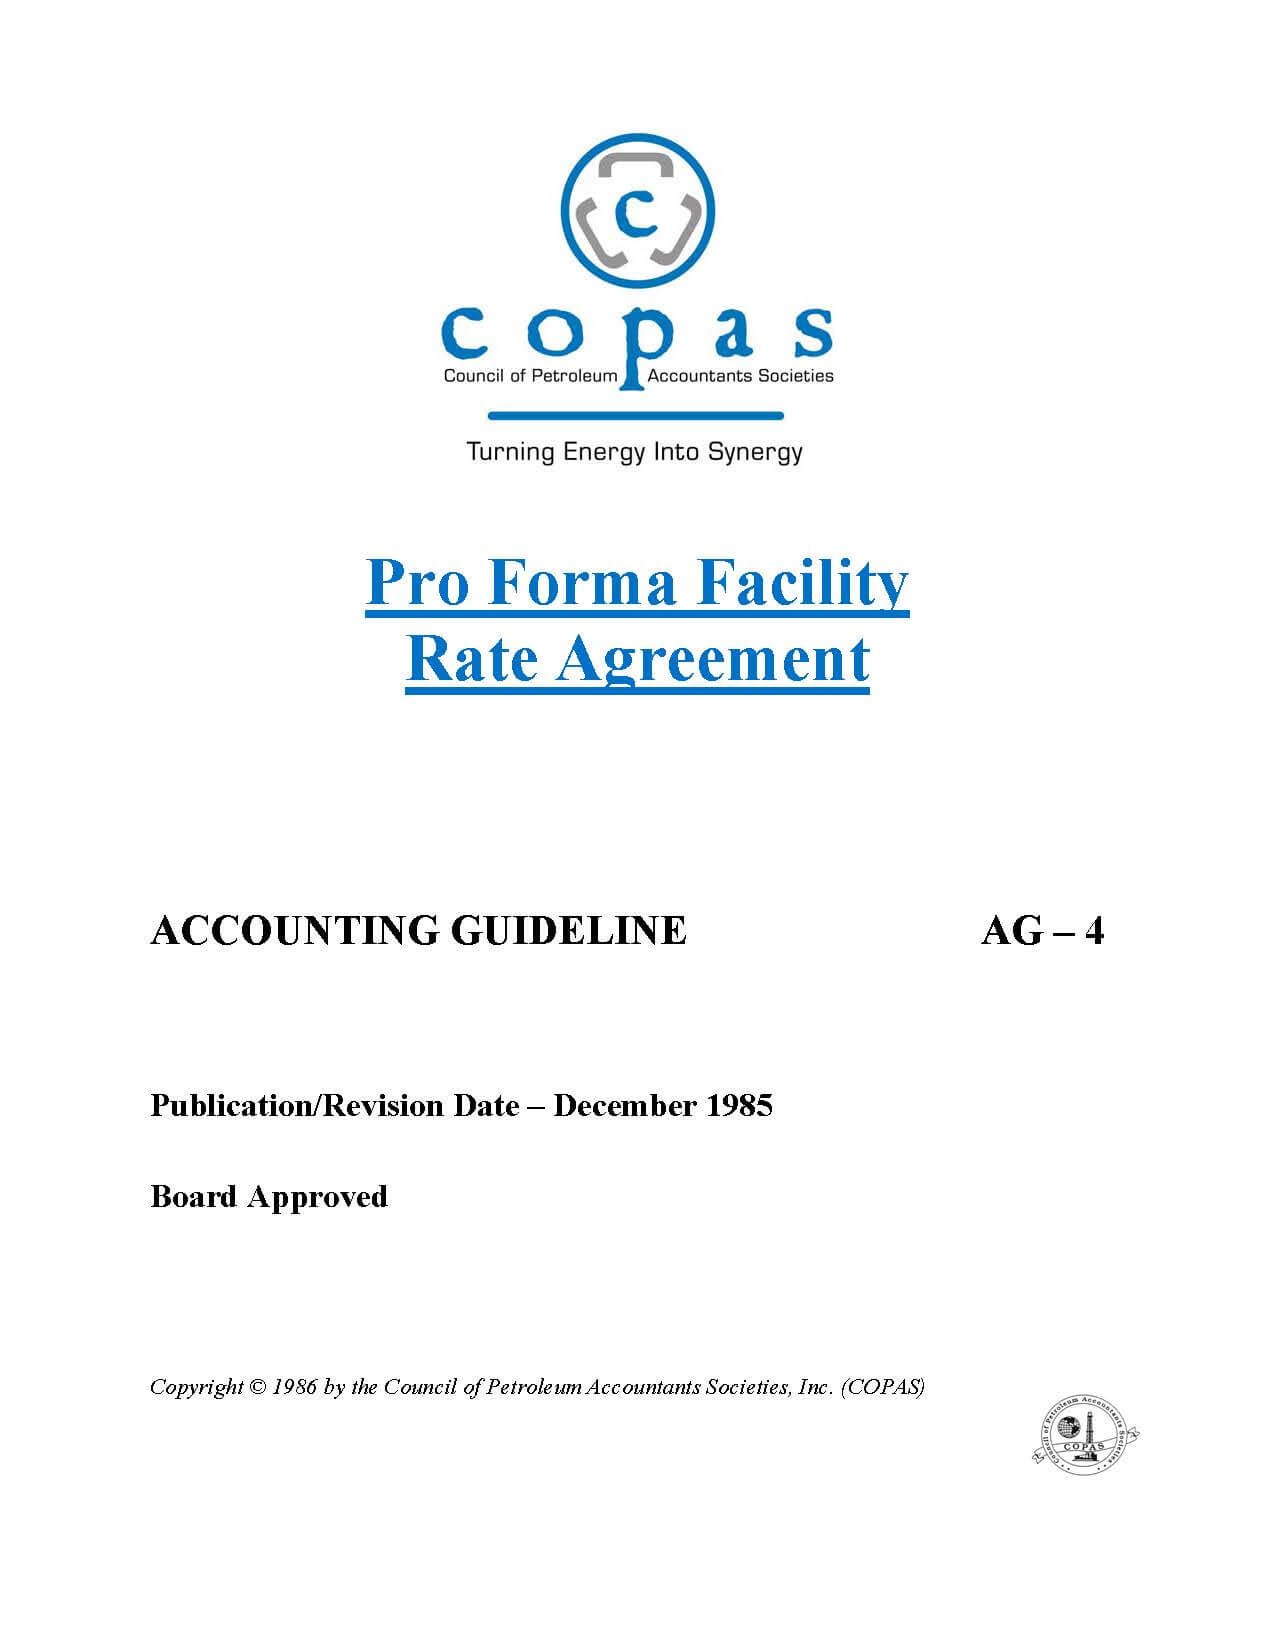 AG-4 Proforma Facility Rate Agreement - products AG 4 Proforma Facility Rate Agreement - Council of Petroleum Accountants Societies